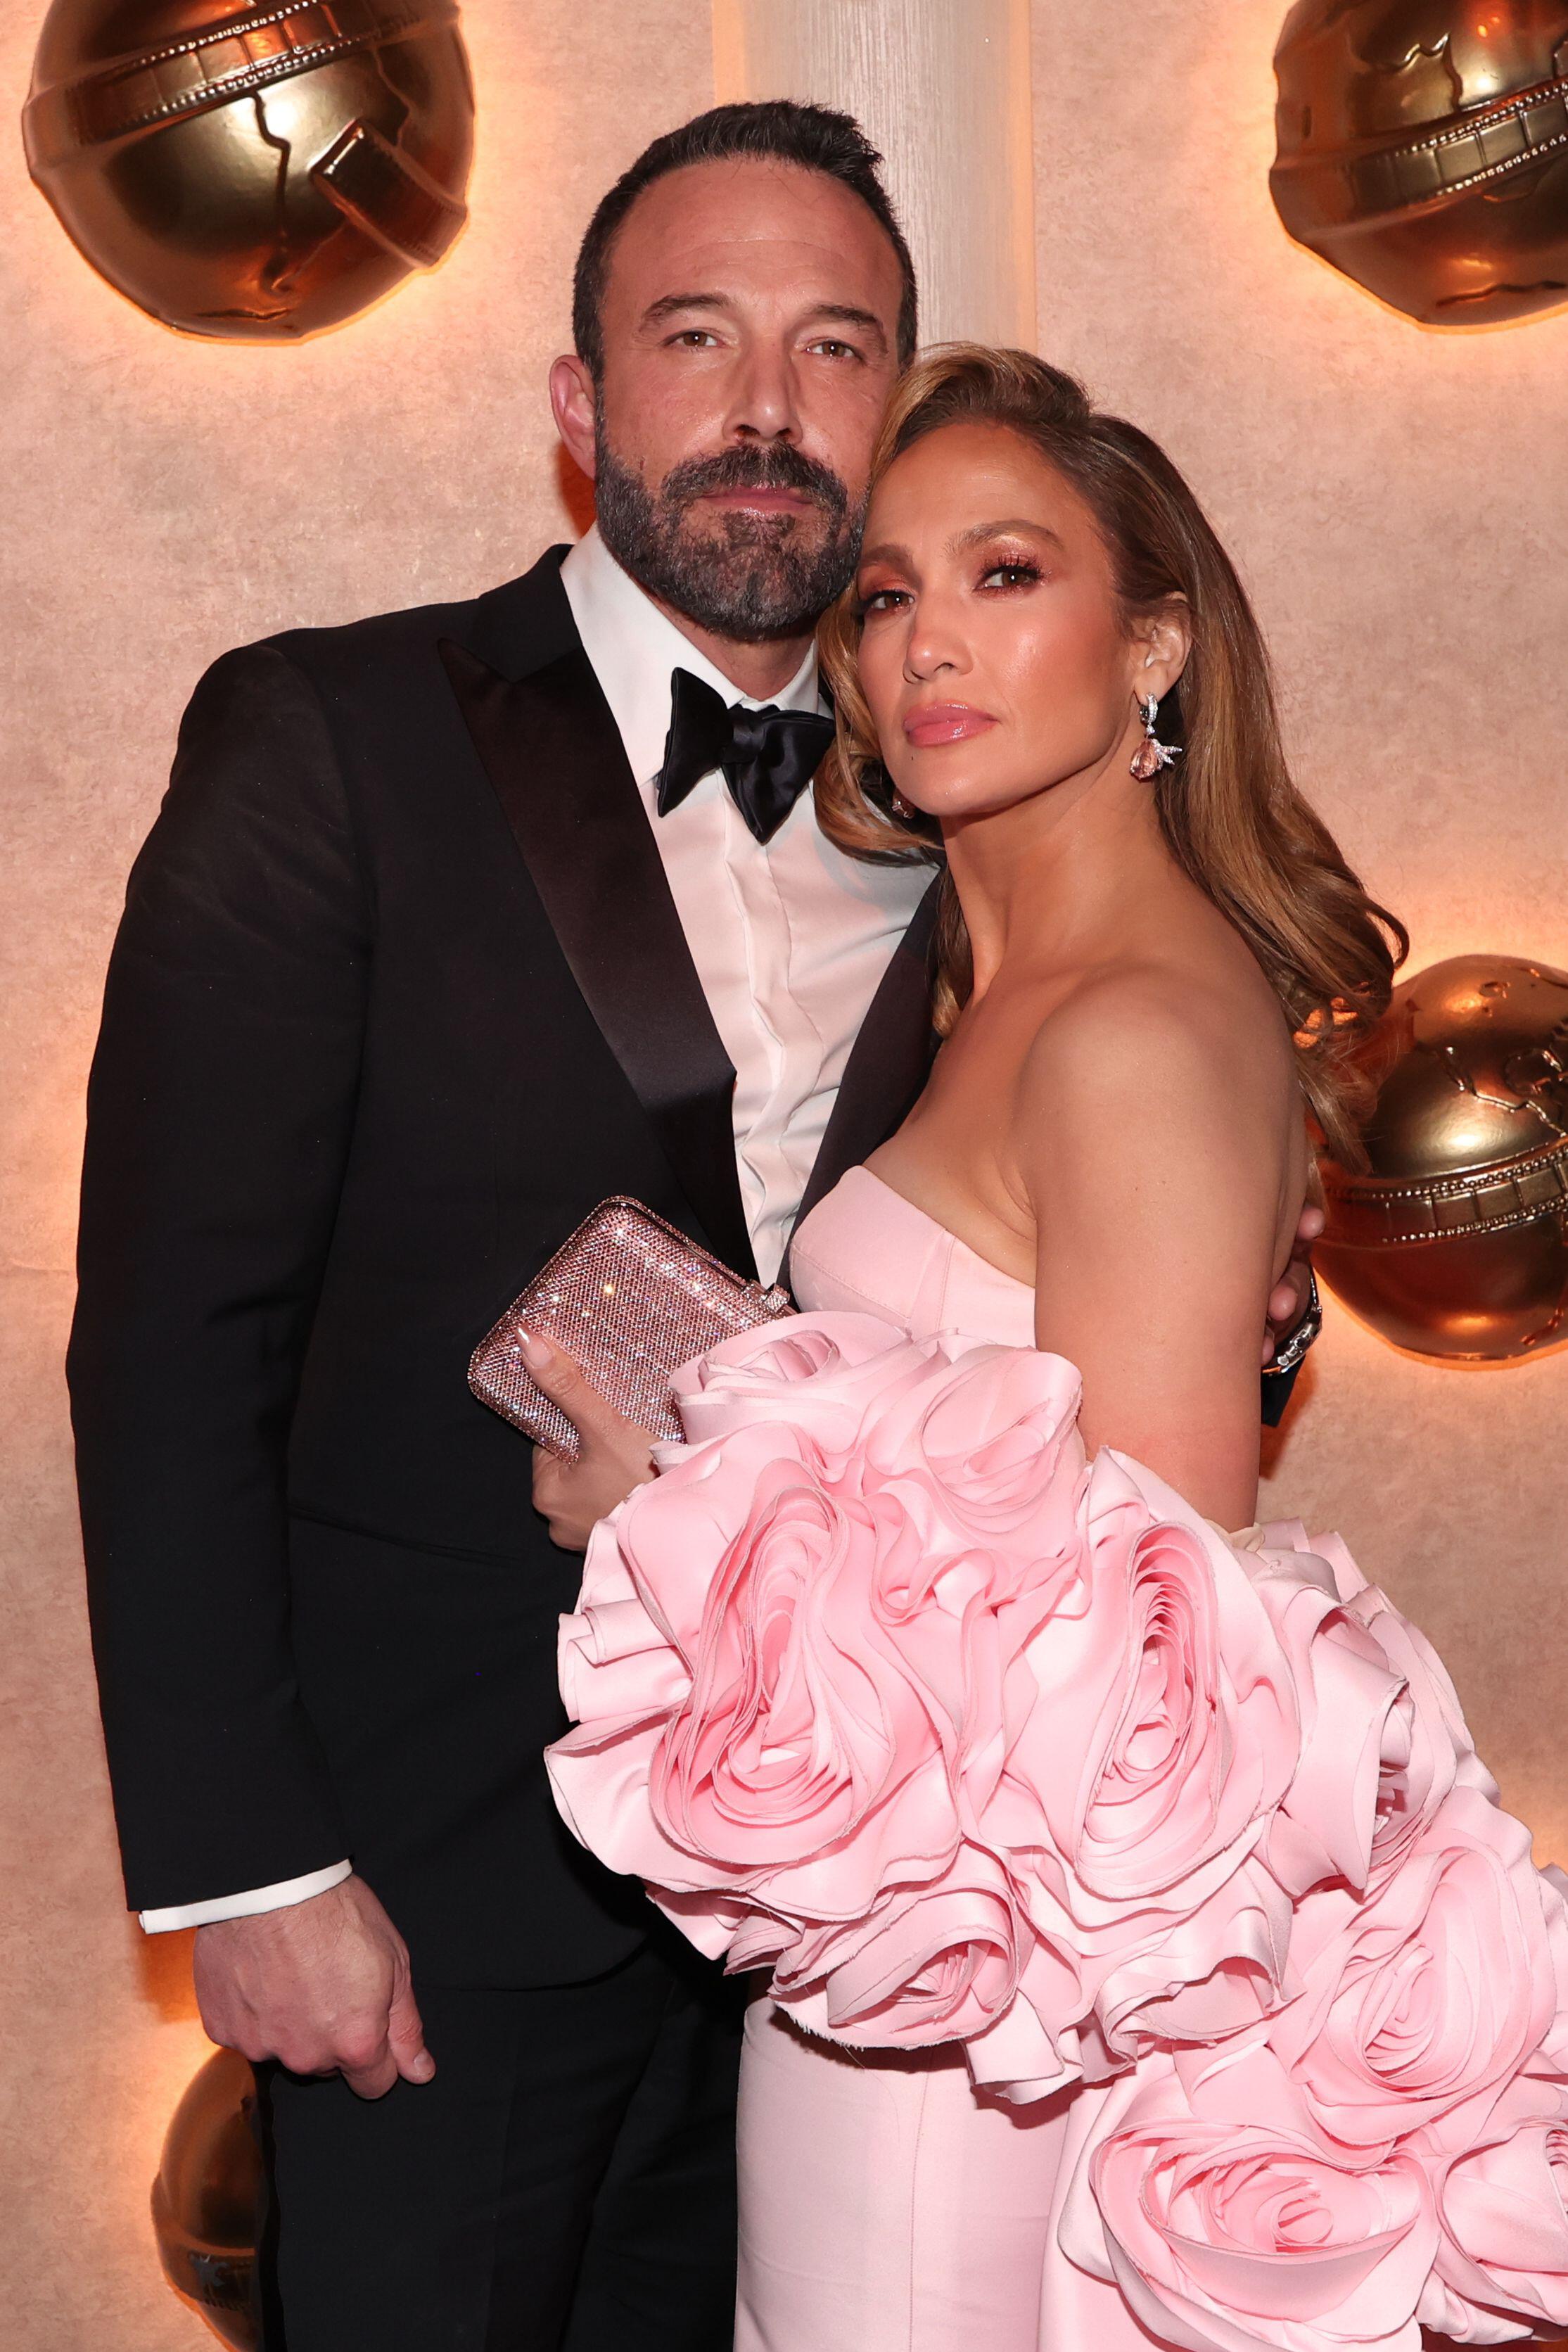 The couple's reunion came after an insider claimed that Ben moved out of JLo's house 'several weeks ago'